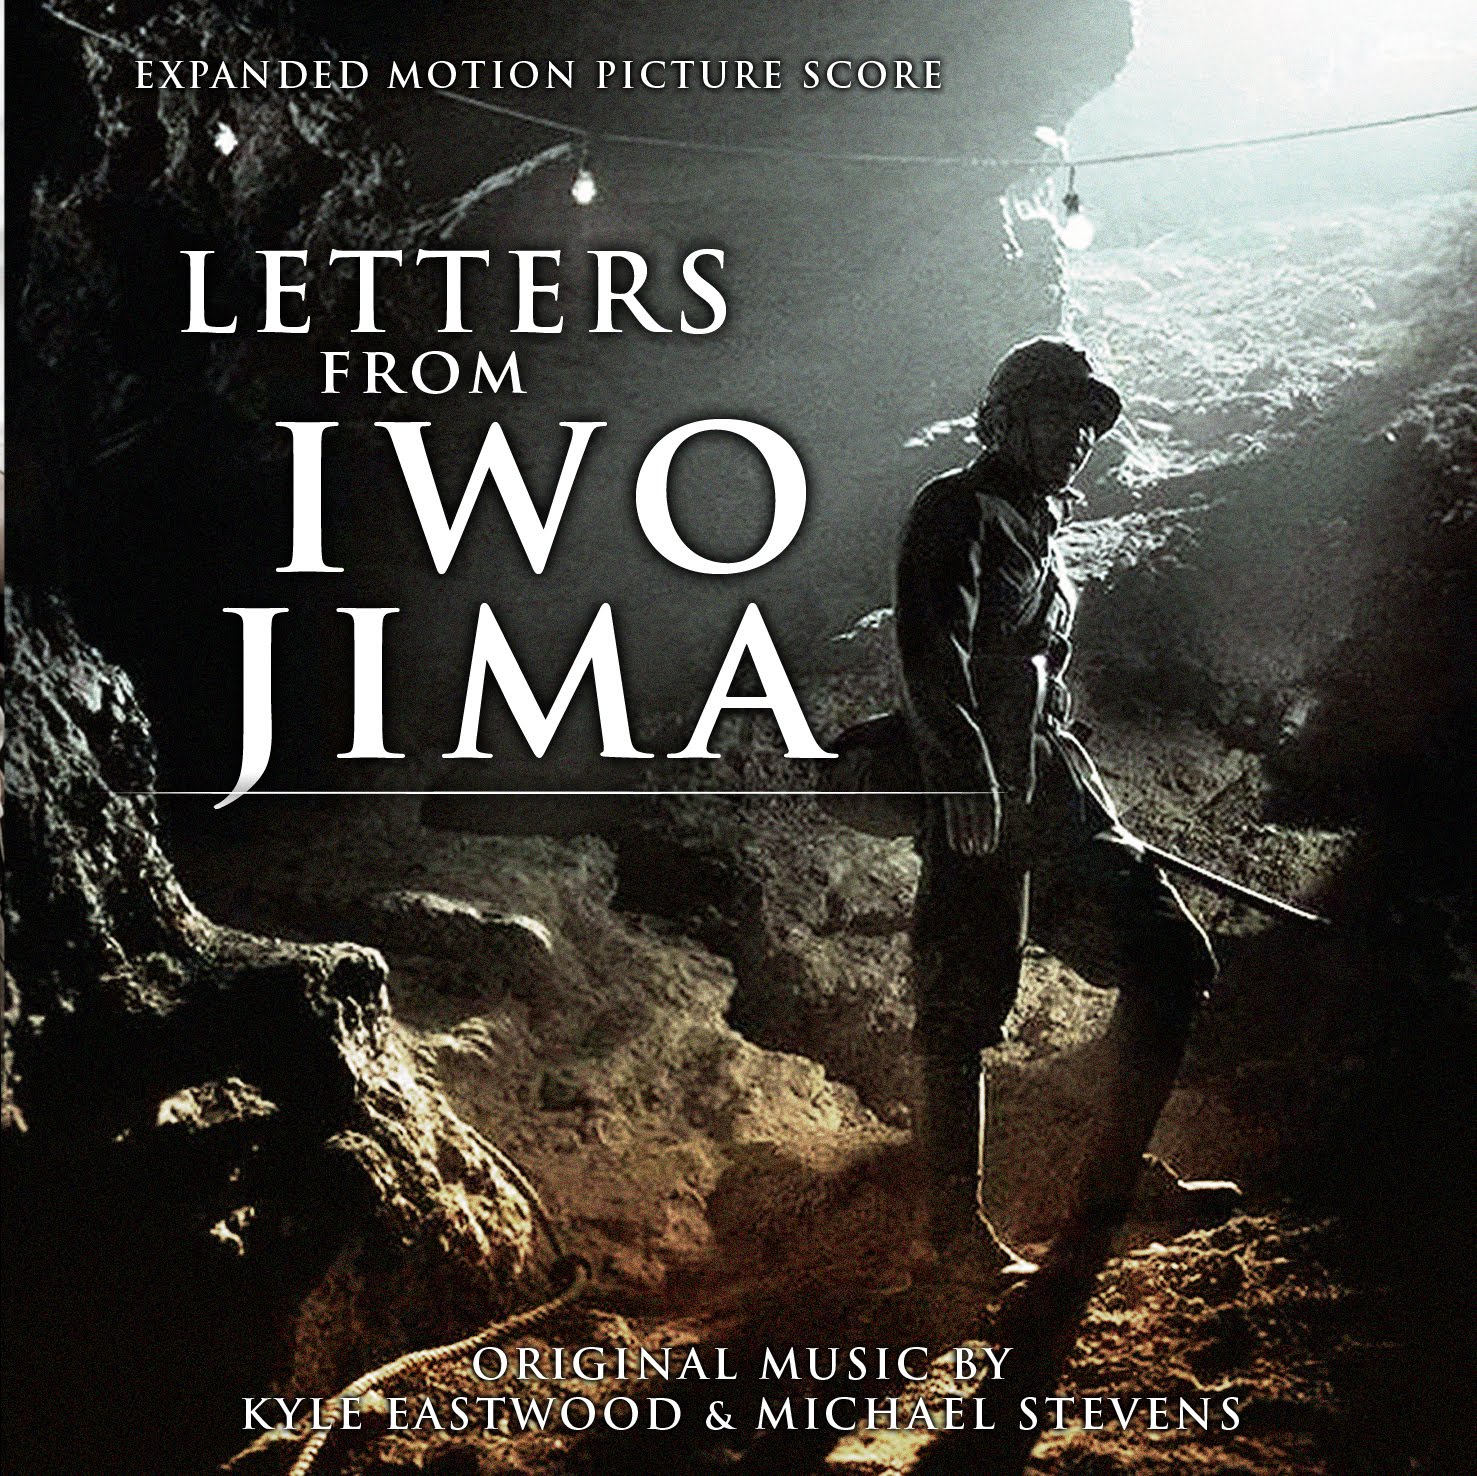 letters from iwo jima movie download